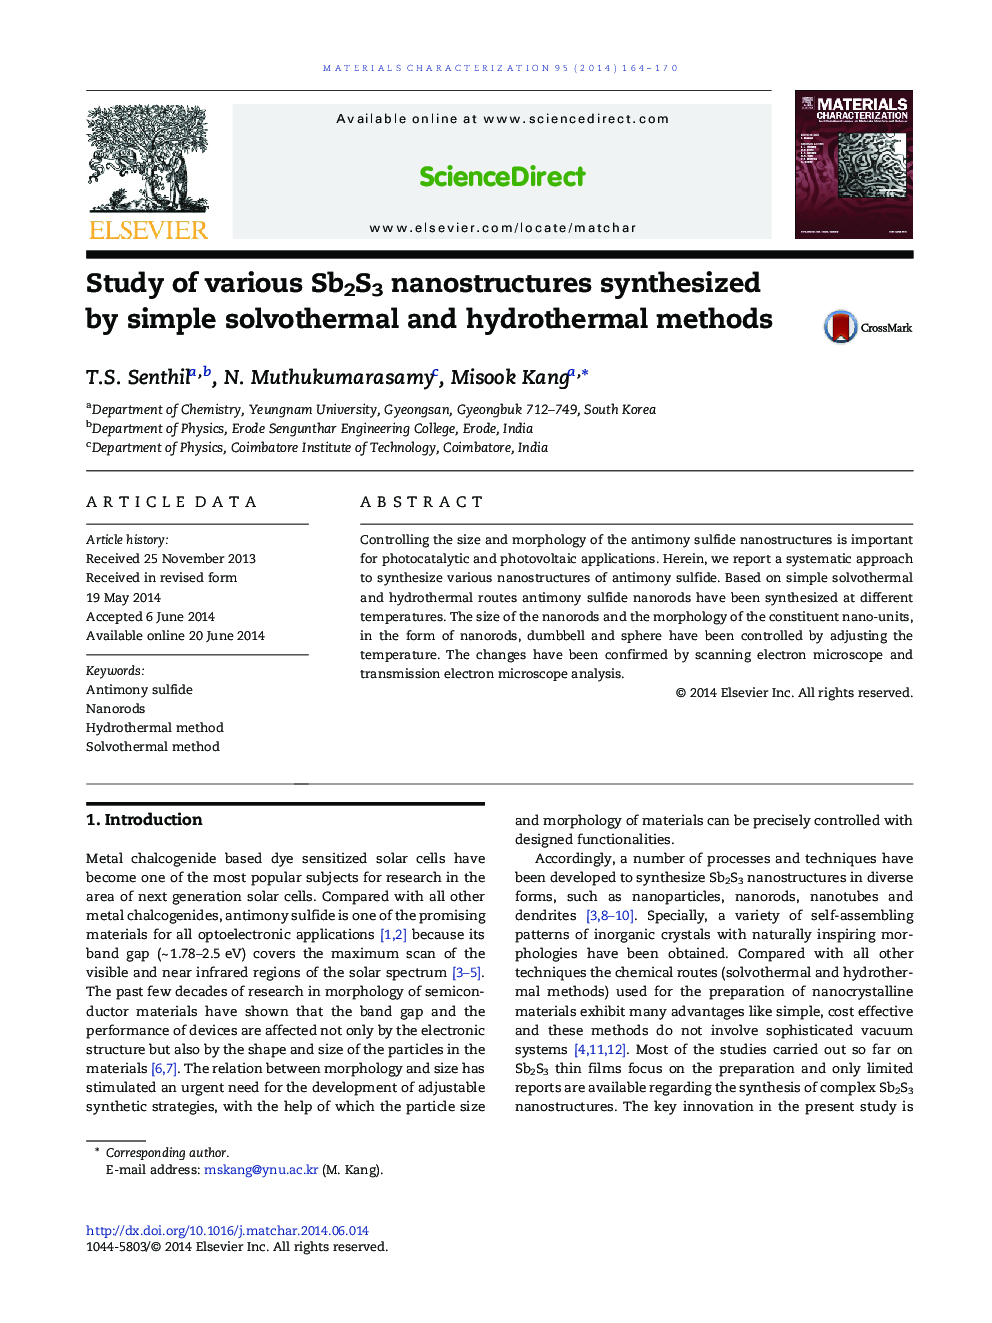 Study of various Sb2S3 nanostructures synthesized by simple solvothermal and hydrothermal methods